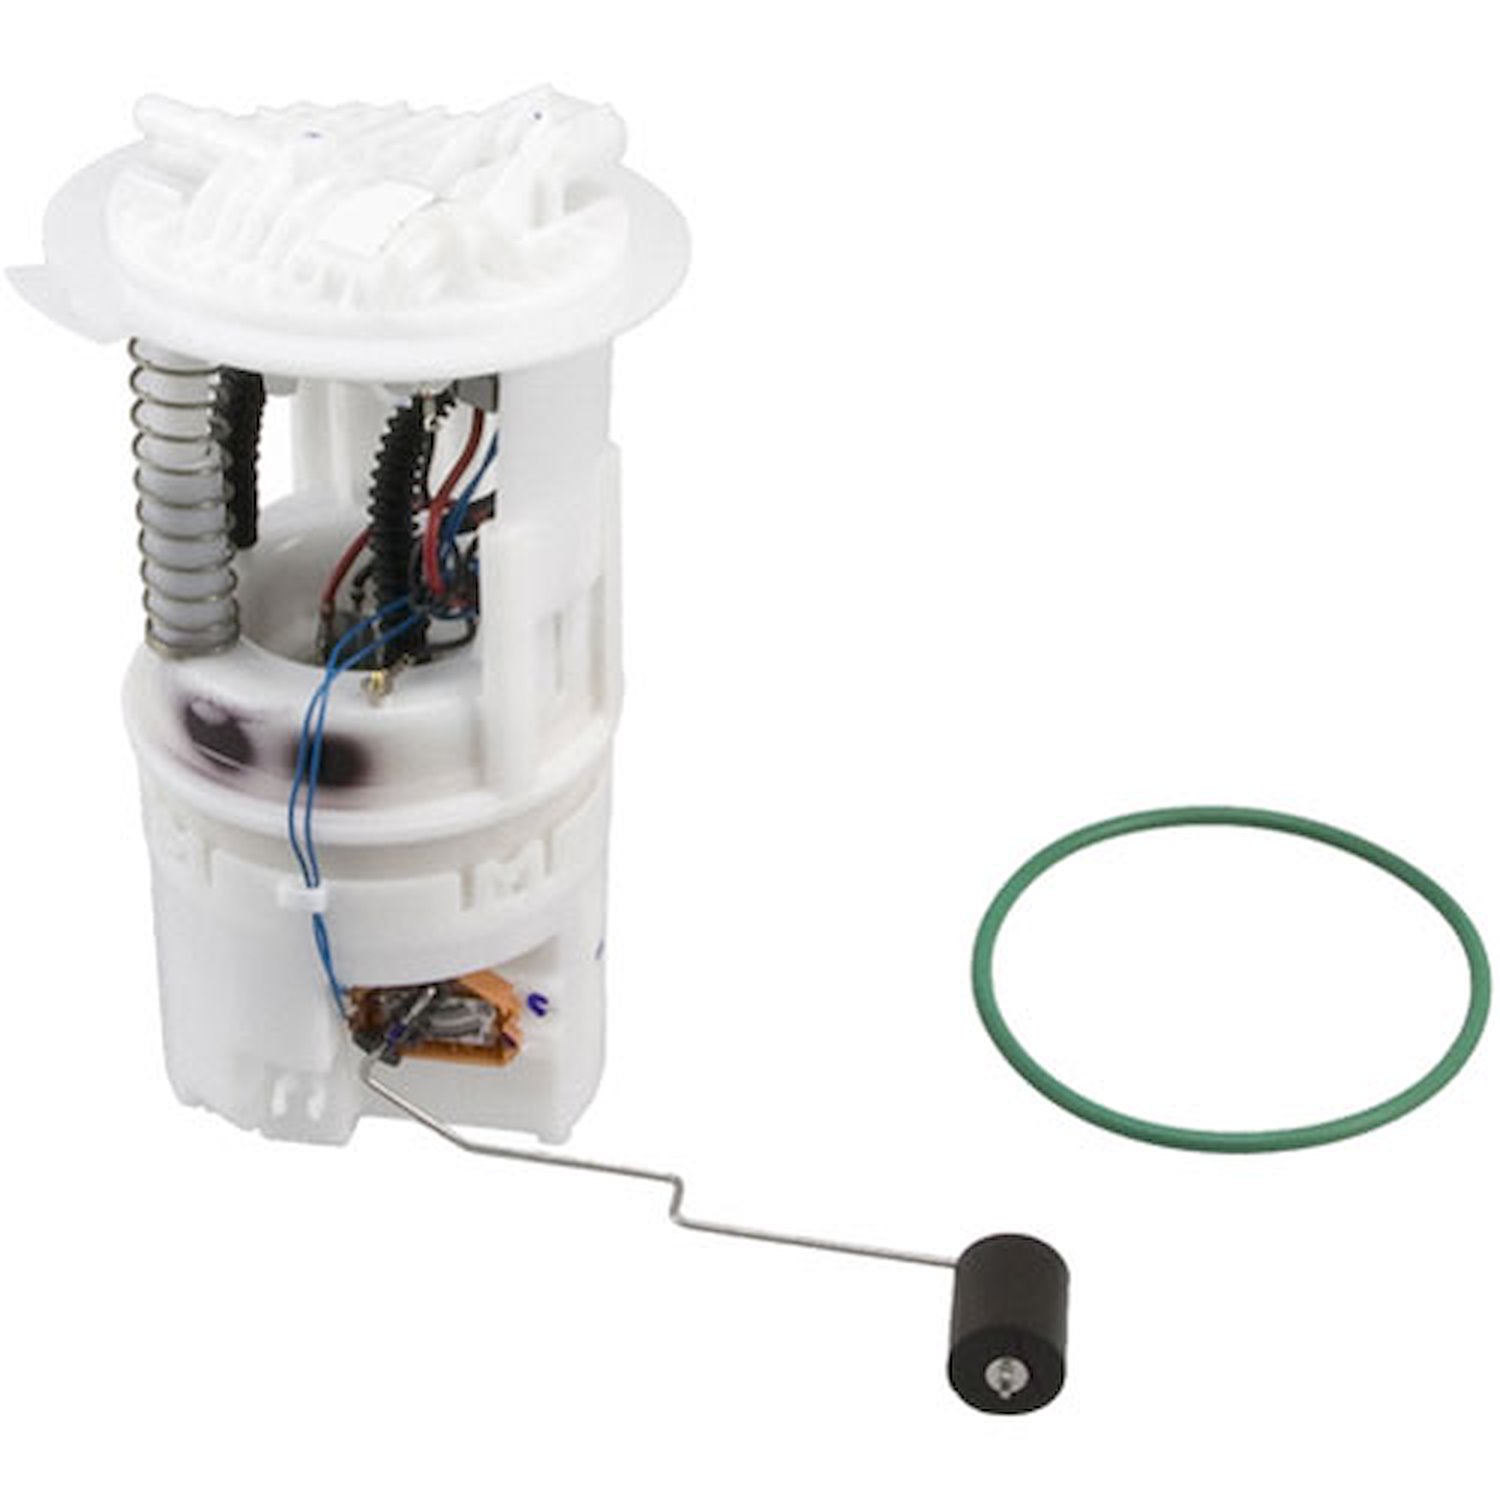 OE Chrysler/Dodge Replacement Electric Fuel Pump Module Assembly 2004-09 Chrysler PT Cruiser 2.4L 4 Cyl